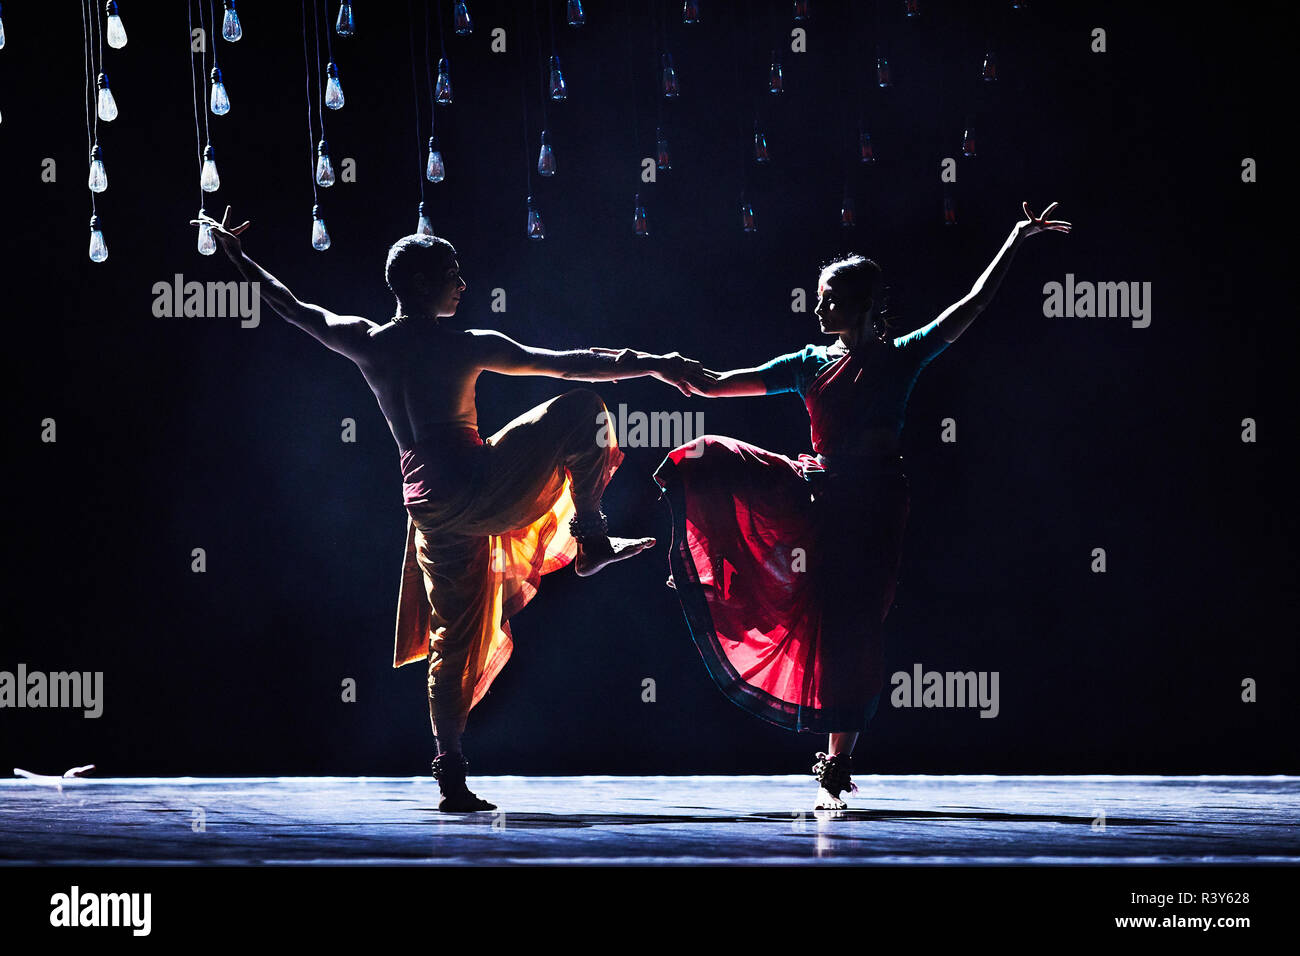 London, UK. 23rd Nov 2018. -In its second year at Sadler’s Wells, Darbar Festival welcomes some of the most exciting names in classical Indian dance, curated by Sadler’s Wells Associate Artist Akram Khan. In the first performance of the festival, Renjith Babu and Neha Mondal Chakravarty present “An Evening of Bharatanatyam” by the bharatanatyam and contemporary artist Mavin Khoo. The second evening of the programme, “Adventures in Odissi and Kathak”, combines two classical Indian dance forms in solo performances by Sujata Mohapatra and Gauri Diwakar.  Credit: ambra vernuccio/Alamy Live News Stock Photo